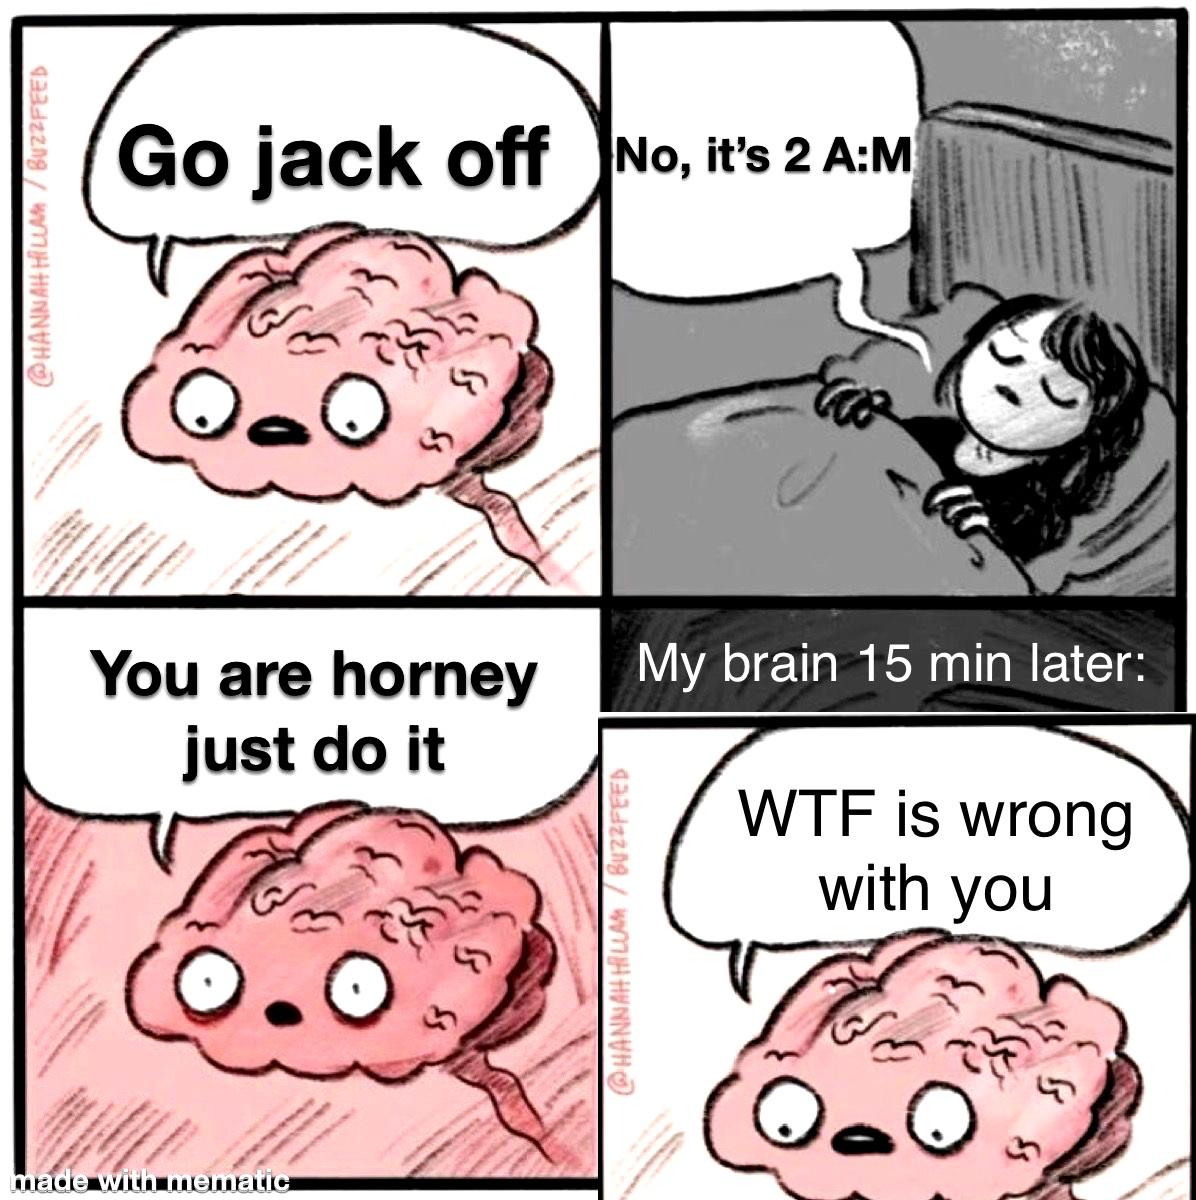 Funny, Laughs, Hold other memes Funny, Laughs, Hold text: Go jack off You are horney just do it o.öl No, it's 2 My brain 15 min later: WTF is wrong with you 